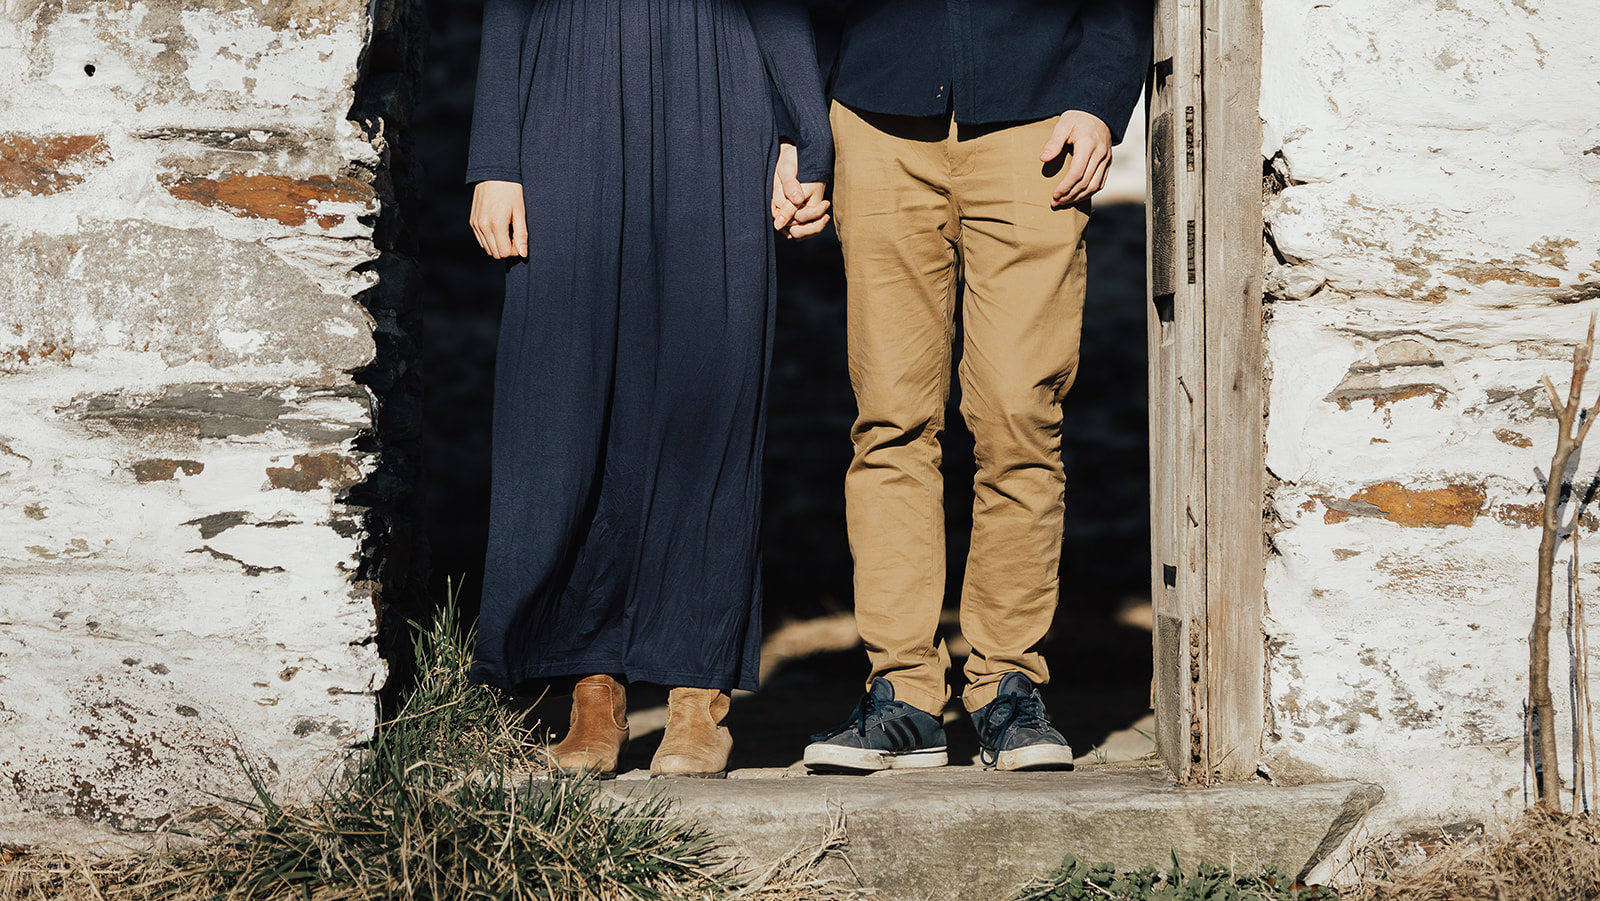 Harpers Ferry Engagement Photo Legs